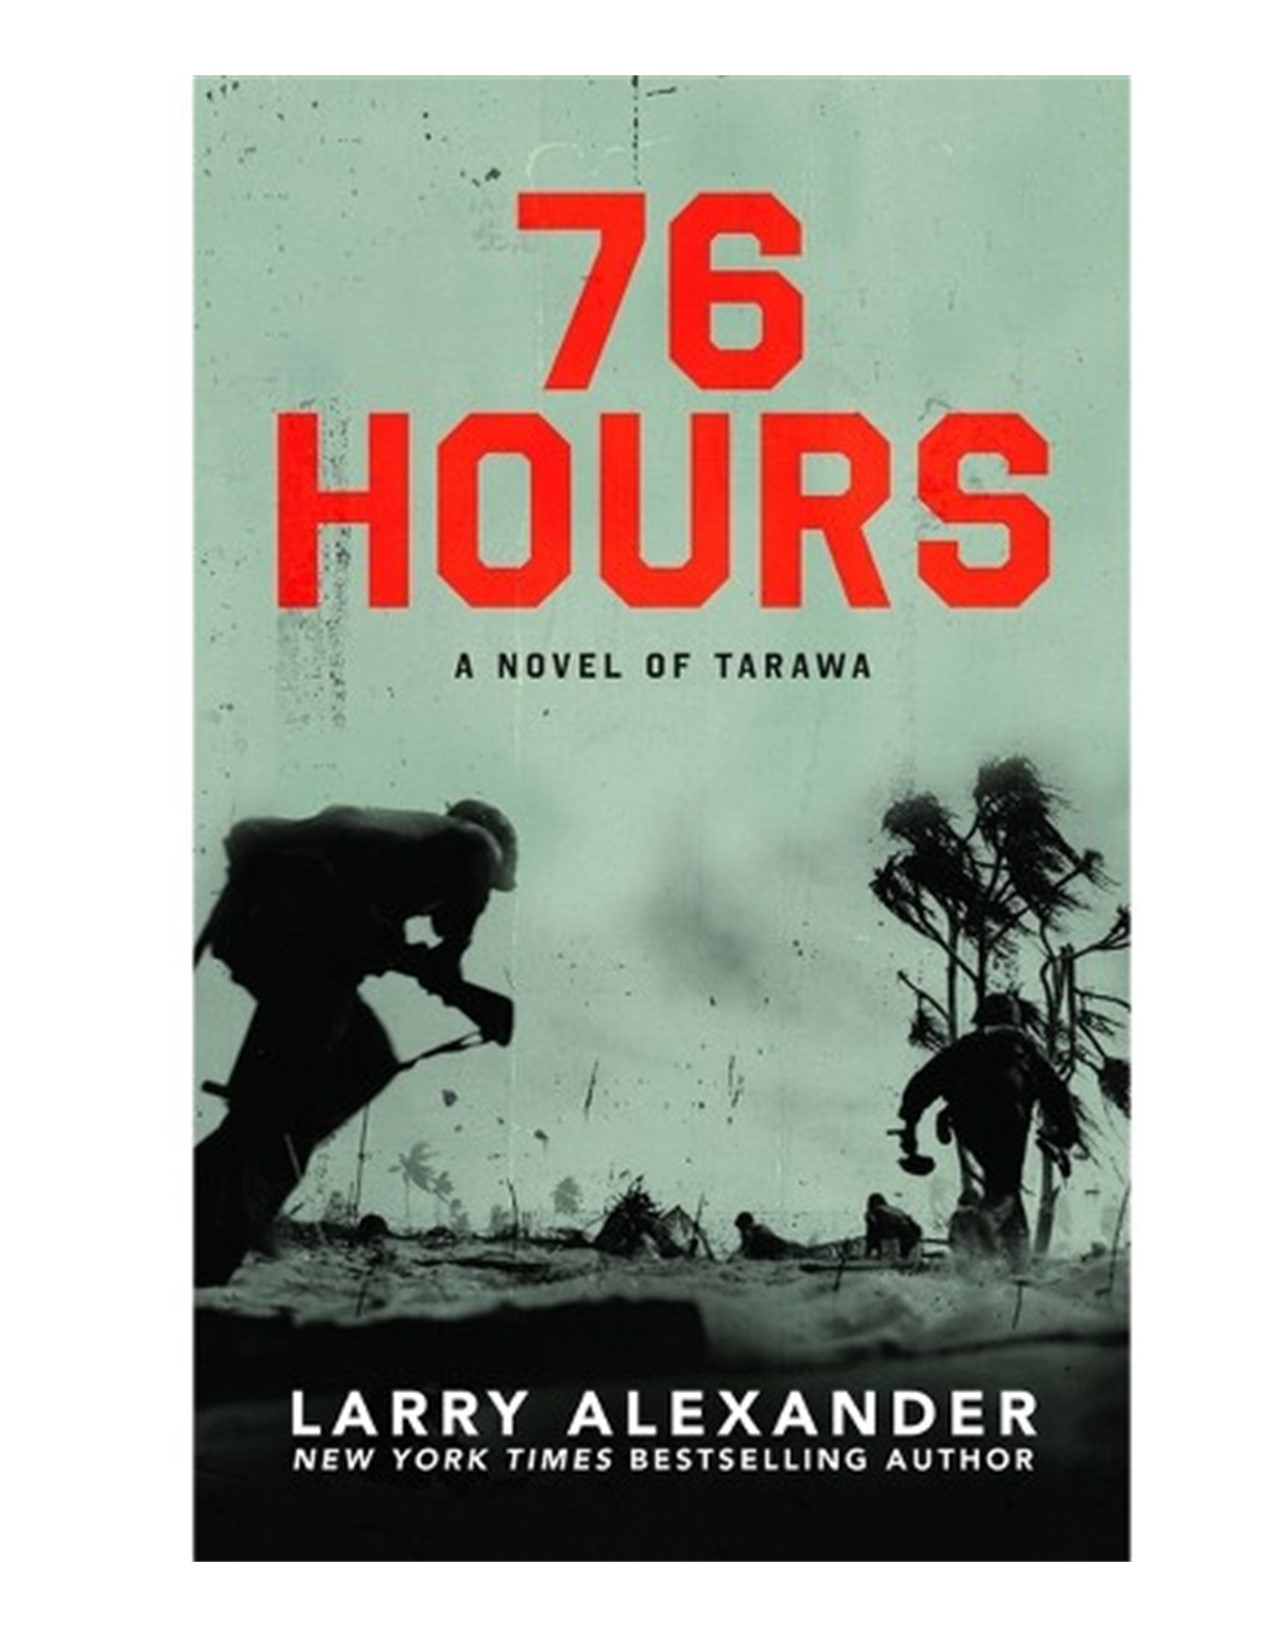 "76 Hours" book cover with silhouettes of soldiers and palm trees.